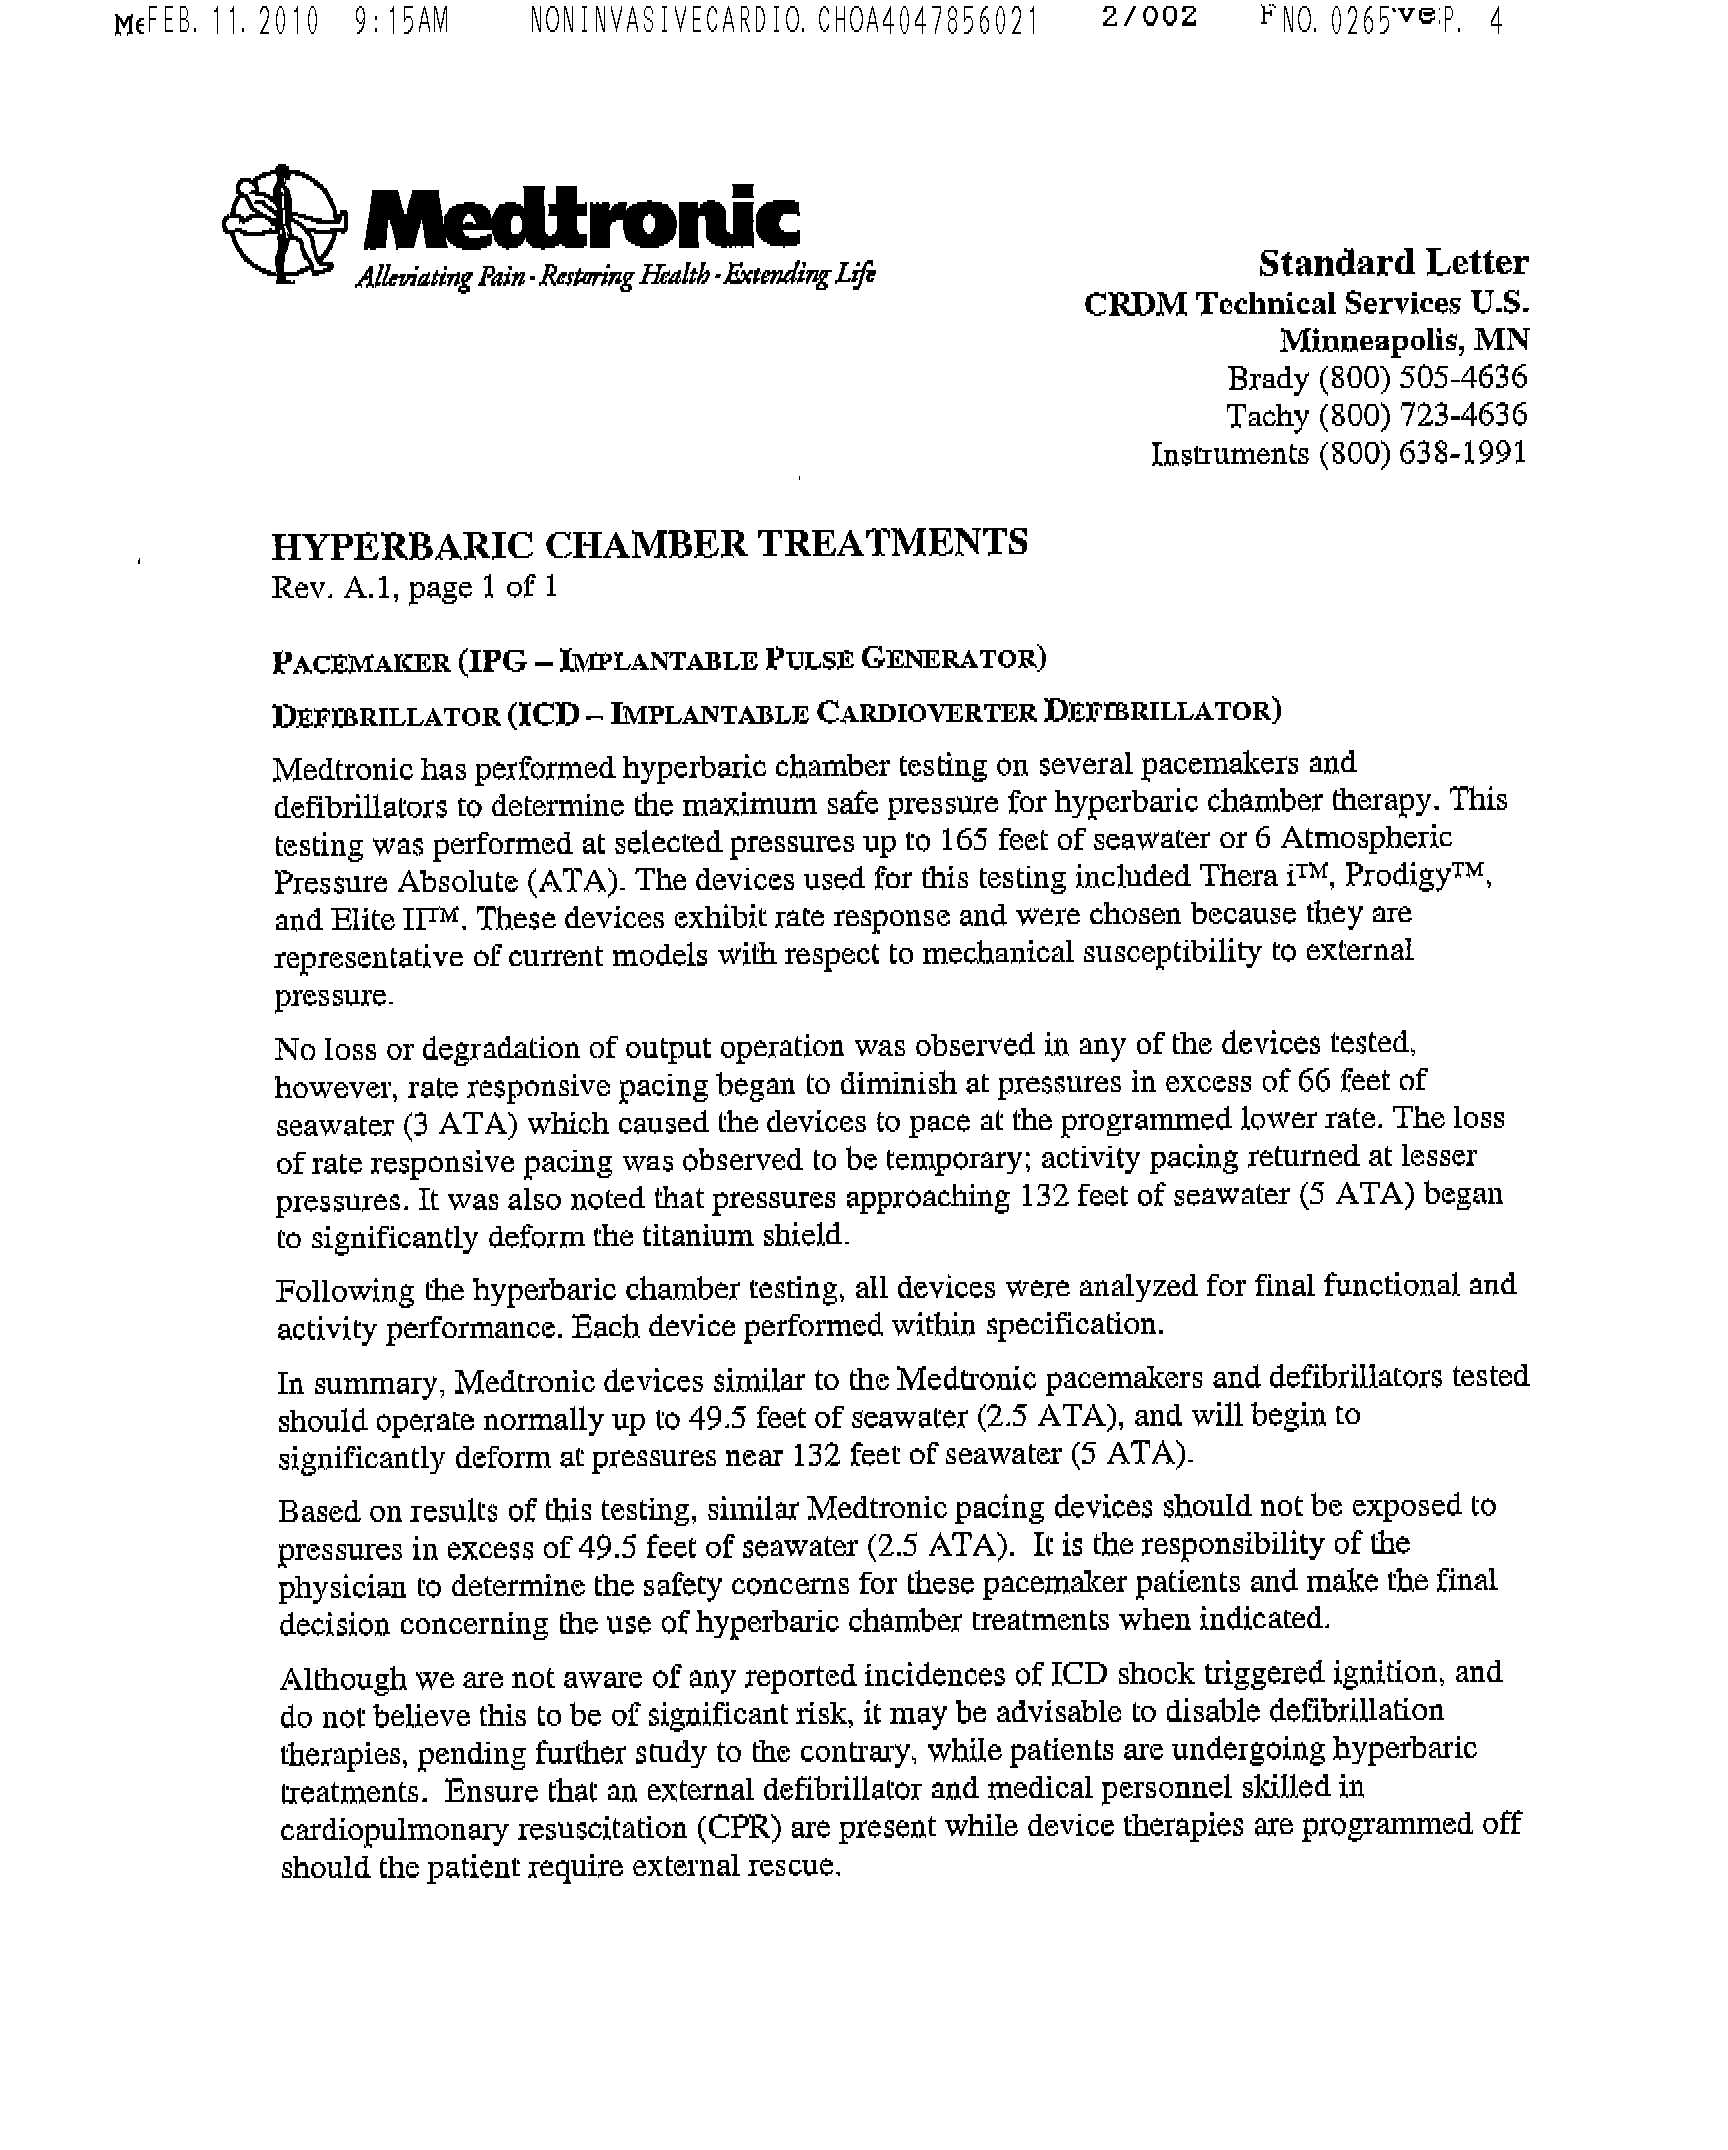 Medtronic Pacemaker Statement